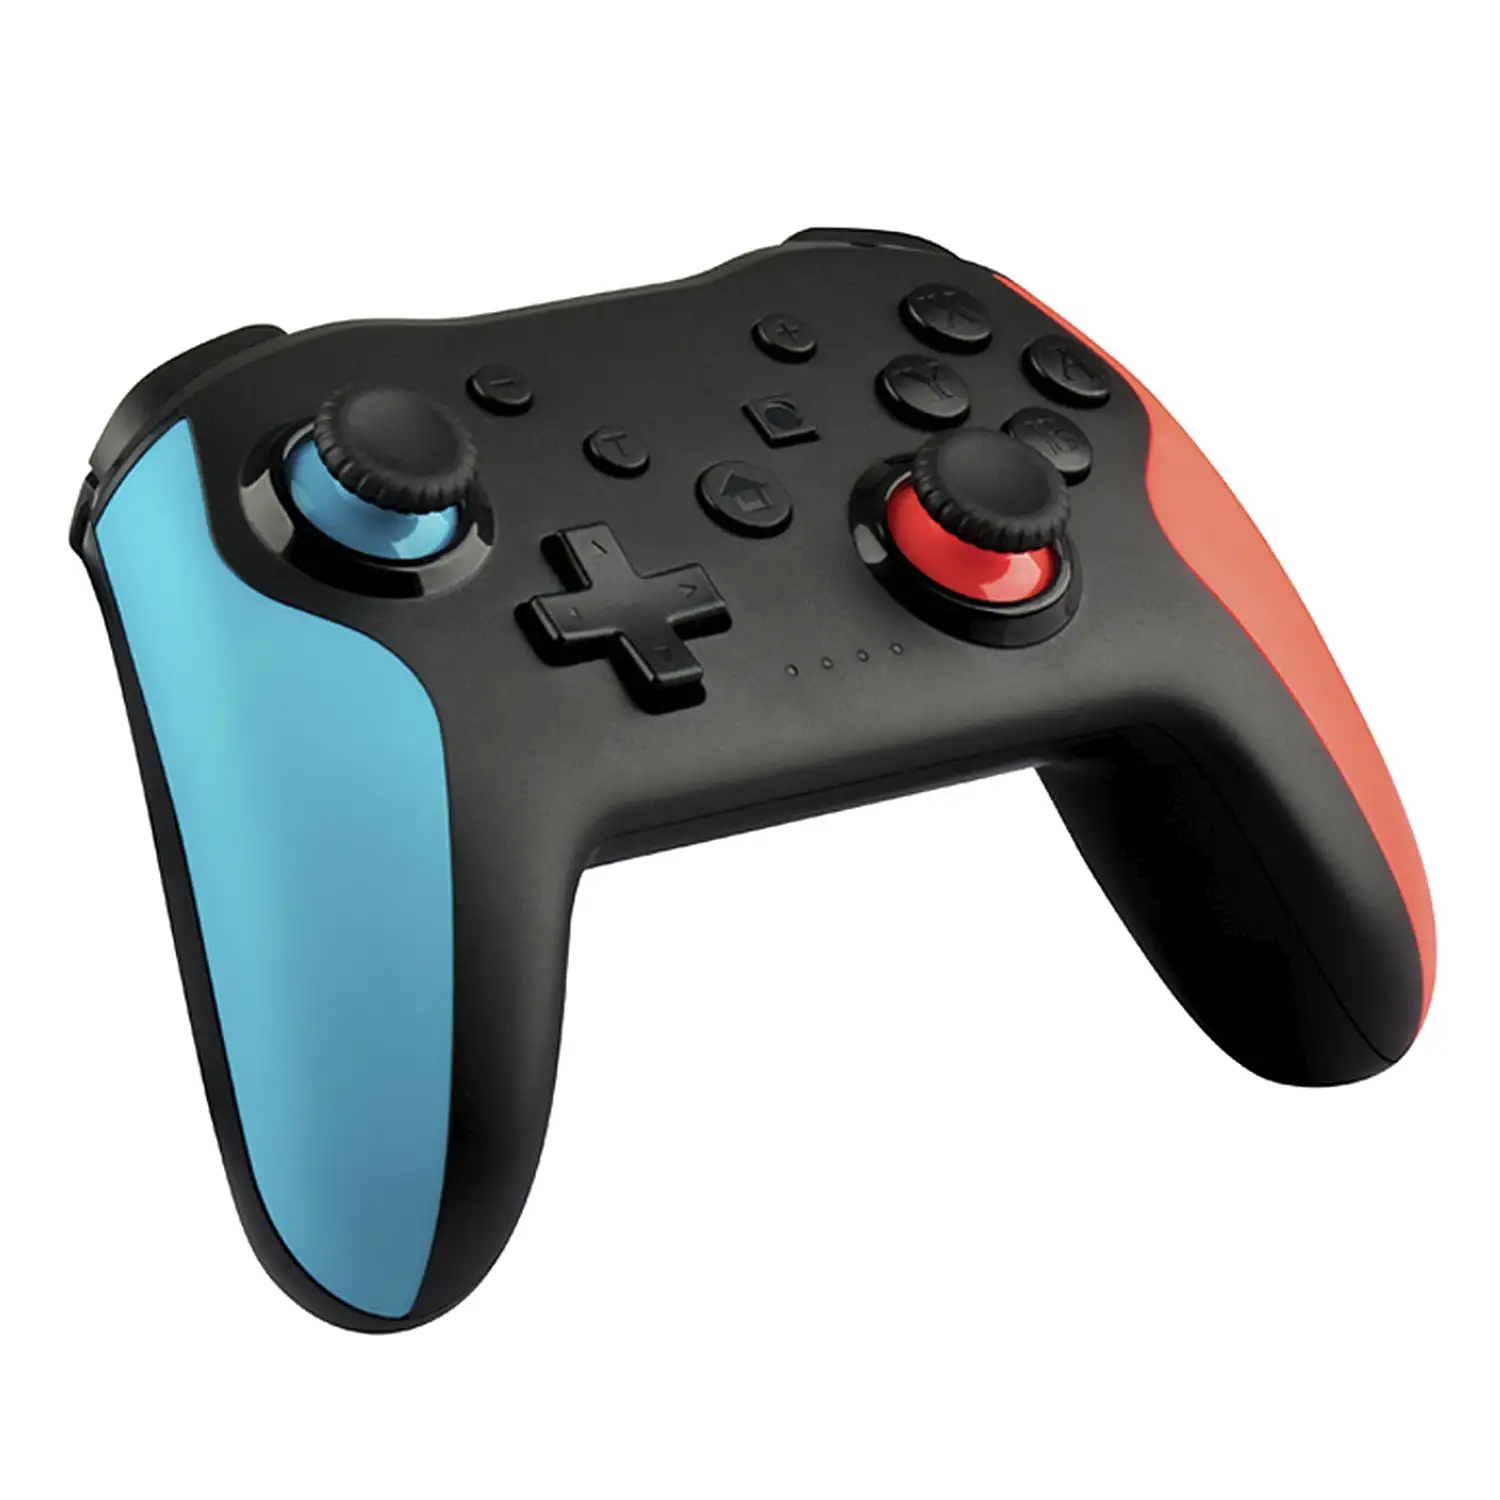 Mando inalámbrico bluetooth.Compatible con N-Switch/PS3/PC/Android phone/ Android TV platform.